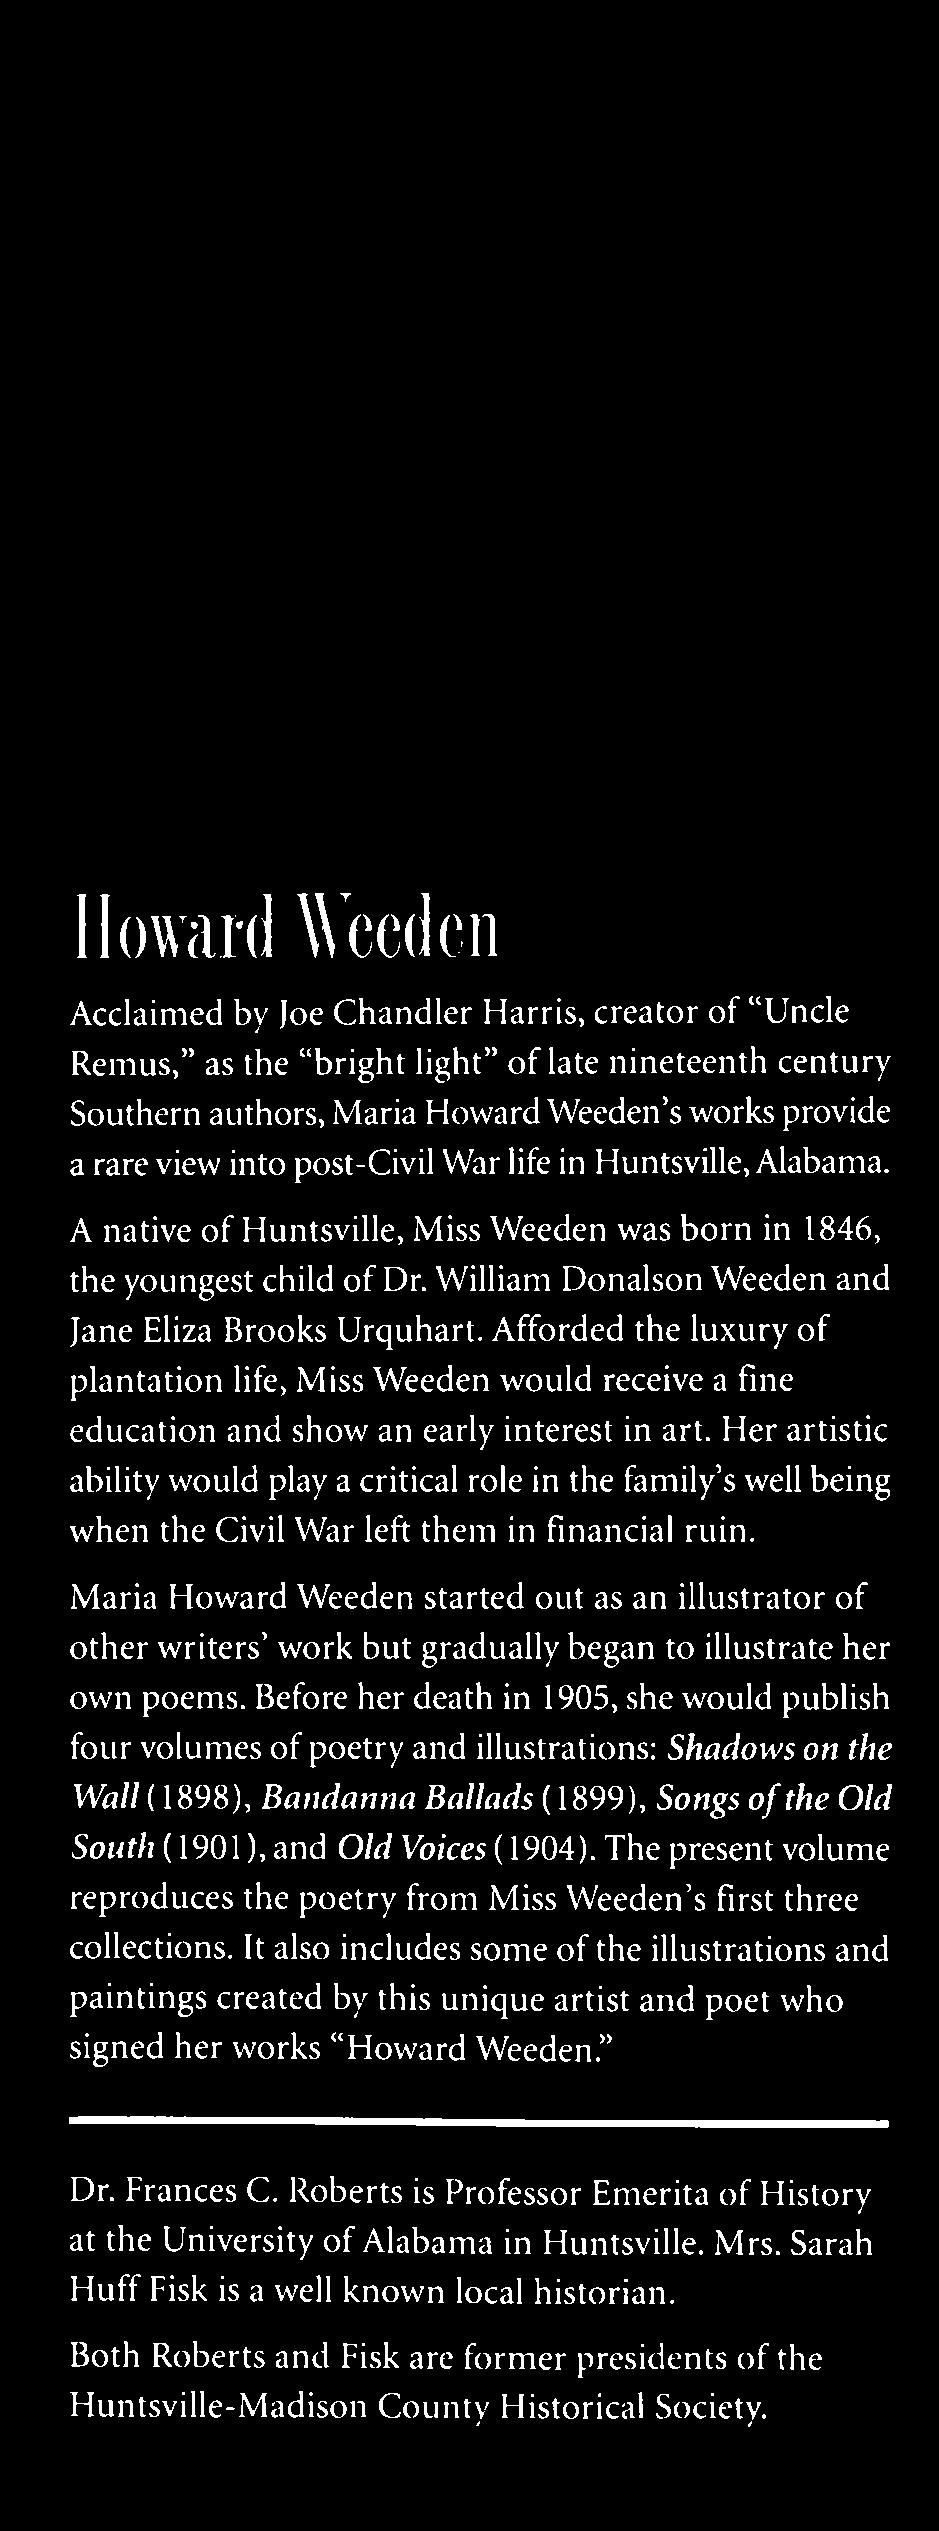 M aria H oward Weeden started out as an illustrator o f other w riters w ork but gradually began to illustrate her own poems.